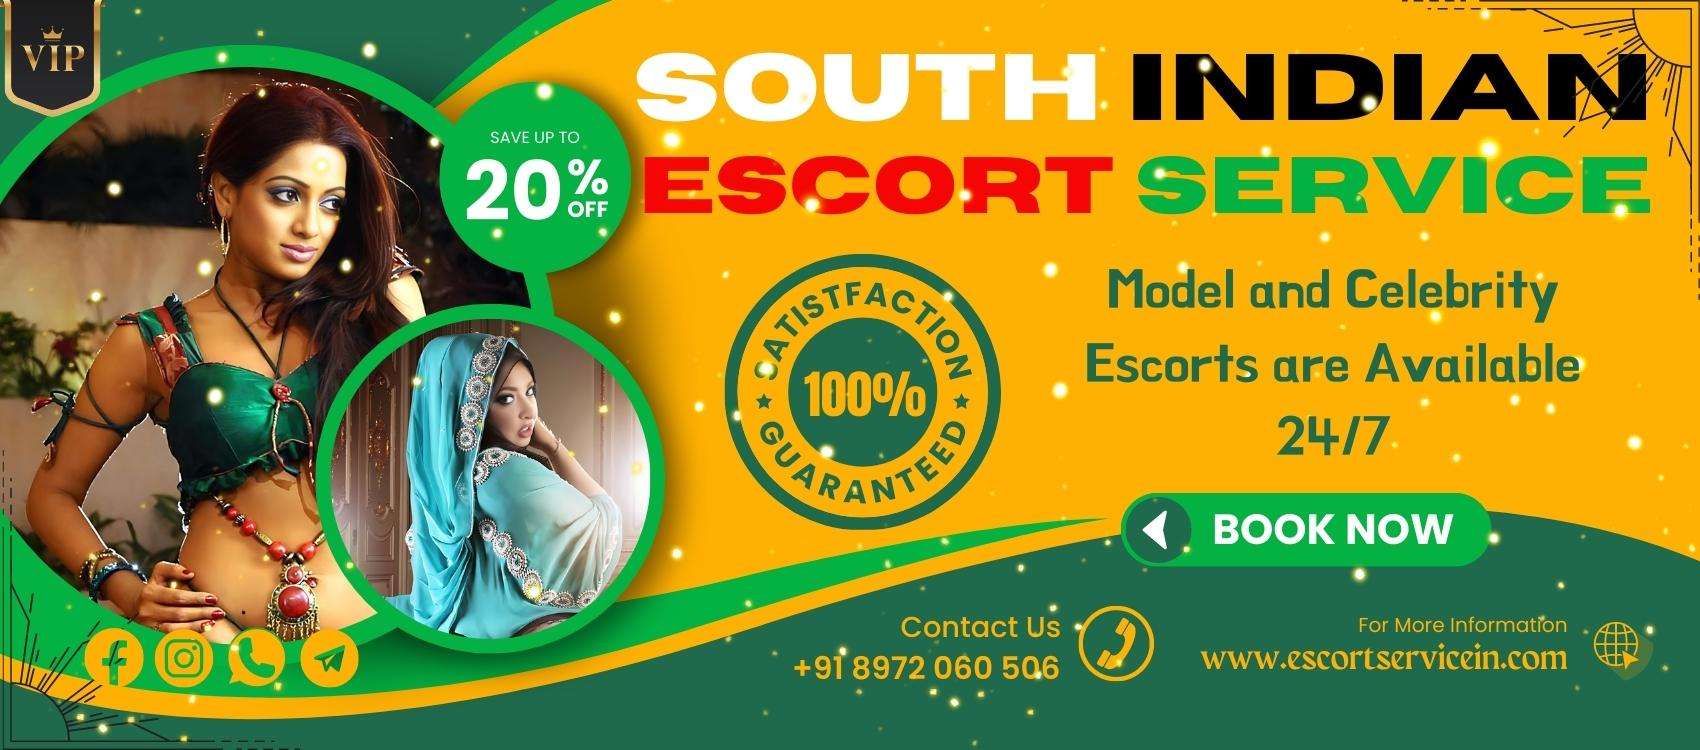 Escort Services in South India